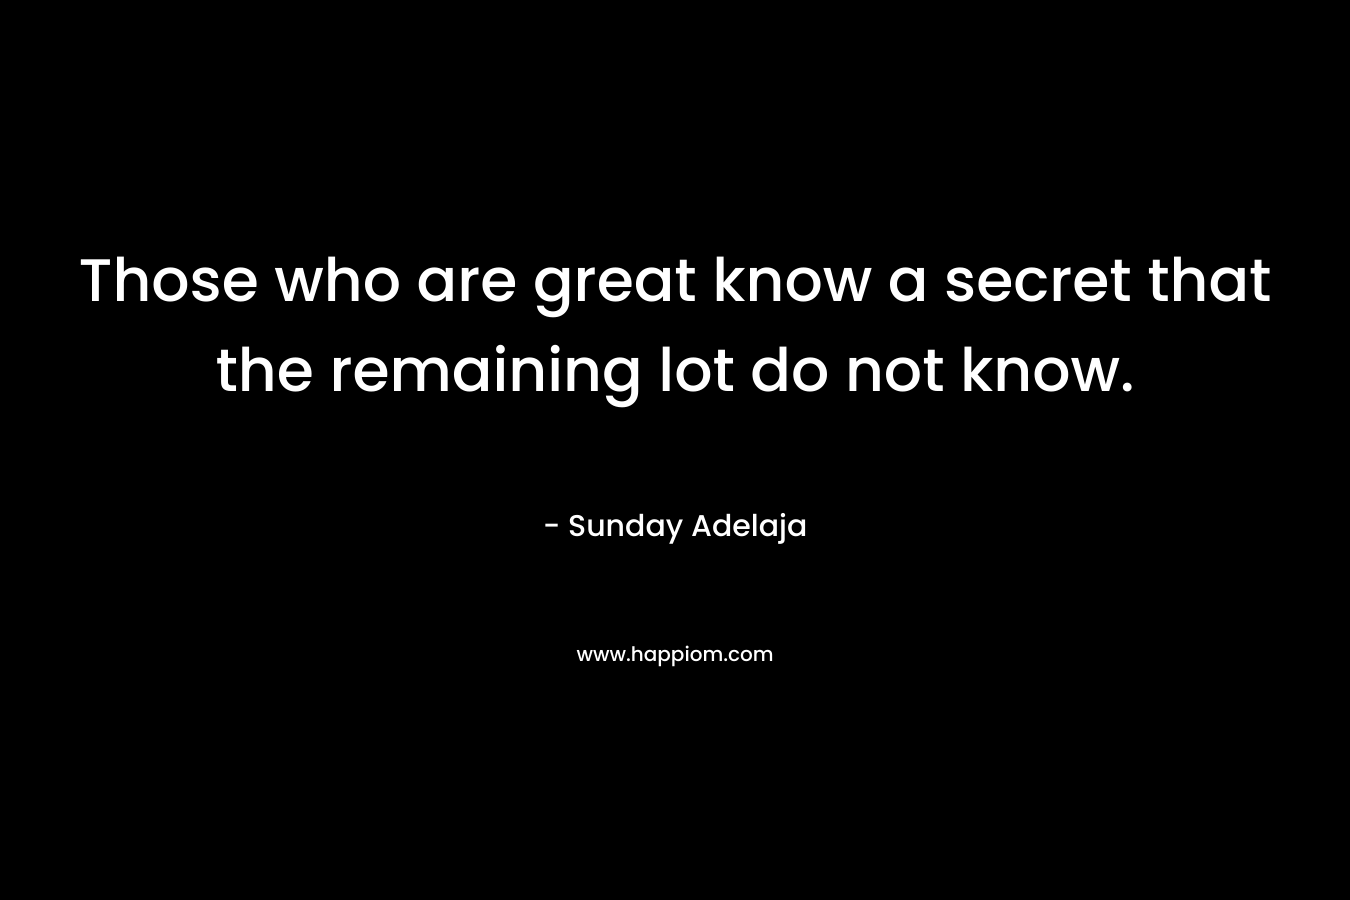 Those who are great know a secret that the remaining lot do not know.